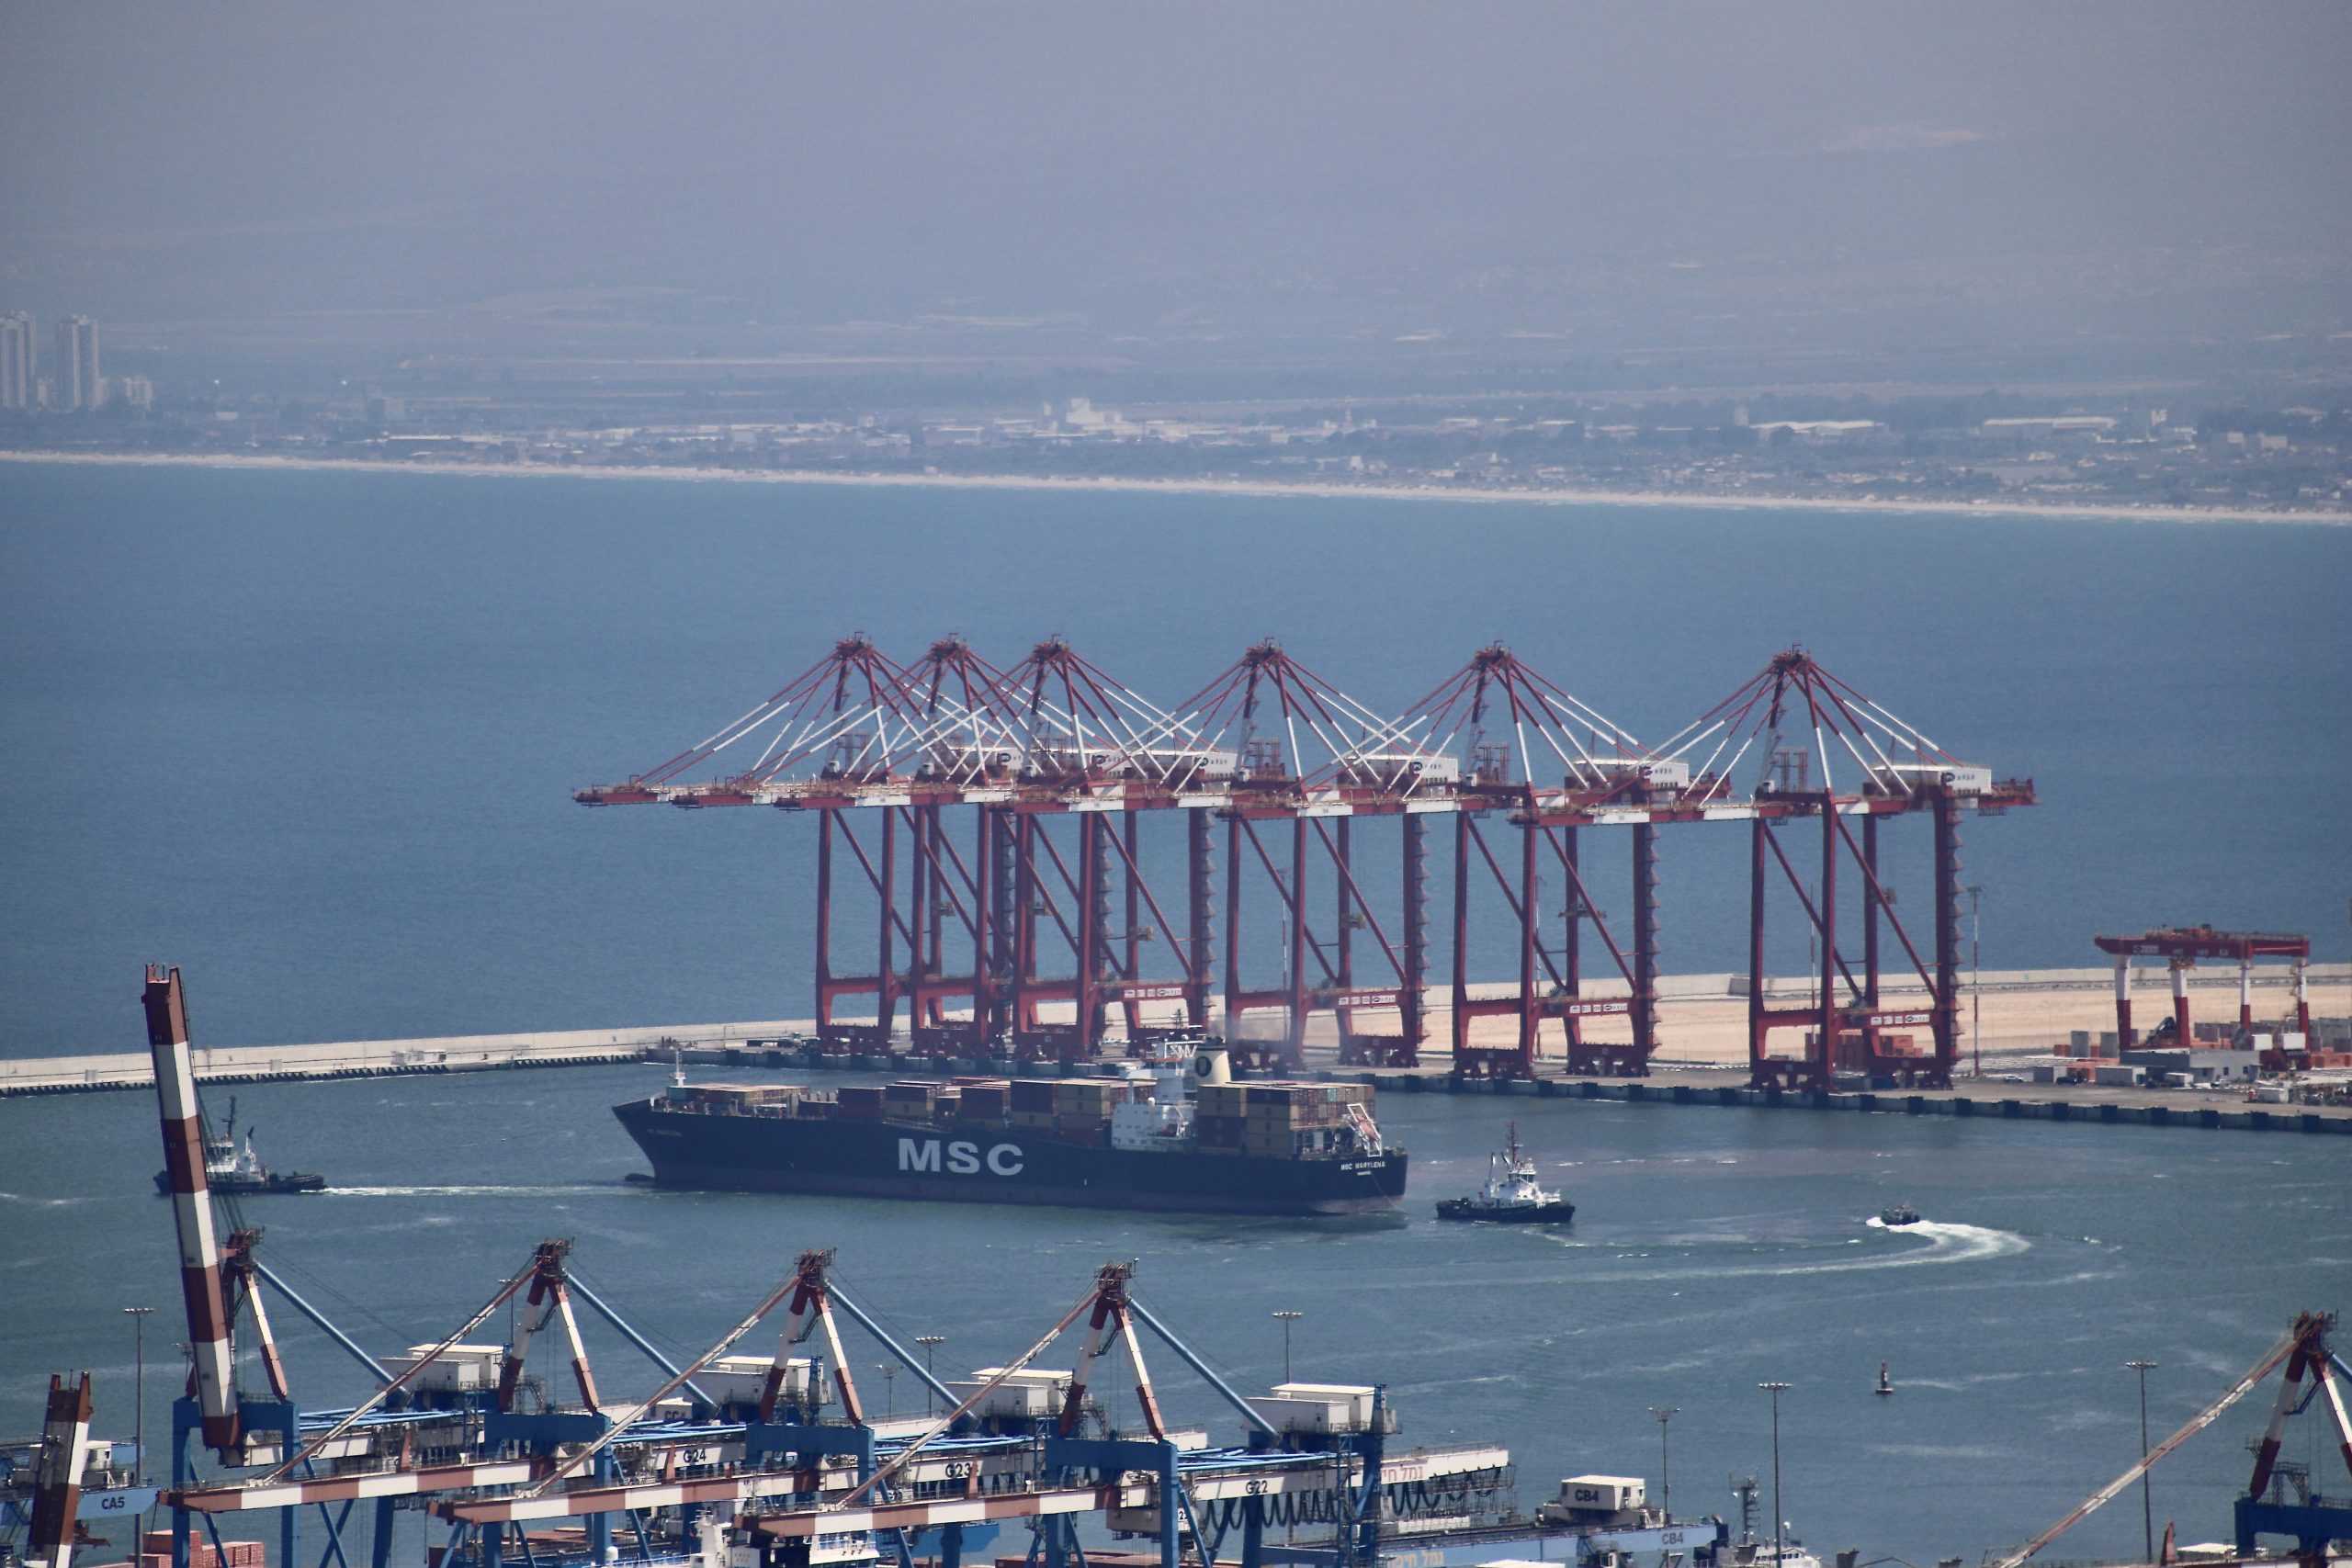 MSC Marylena, the first ship processed in a new Bay Port in Haifa, leaves to Turkey